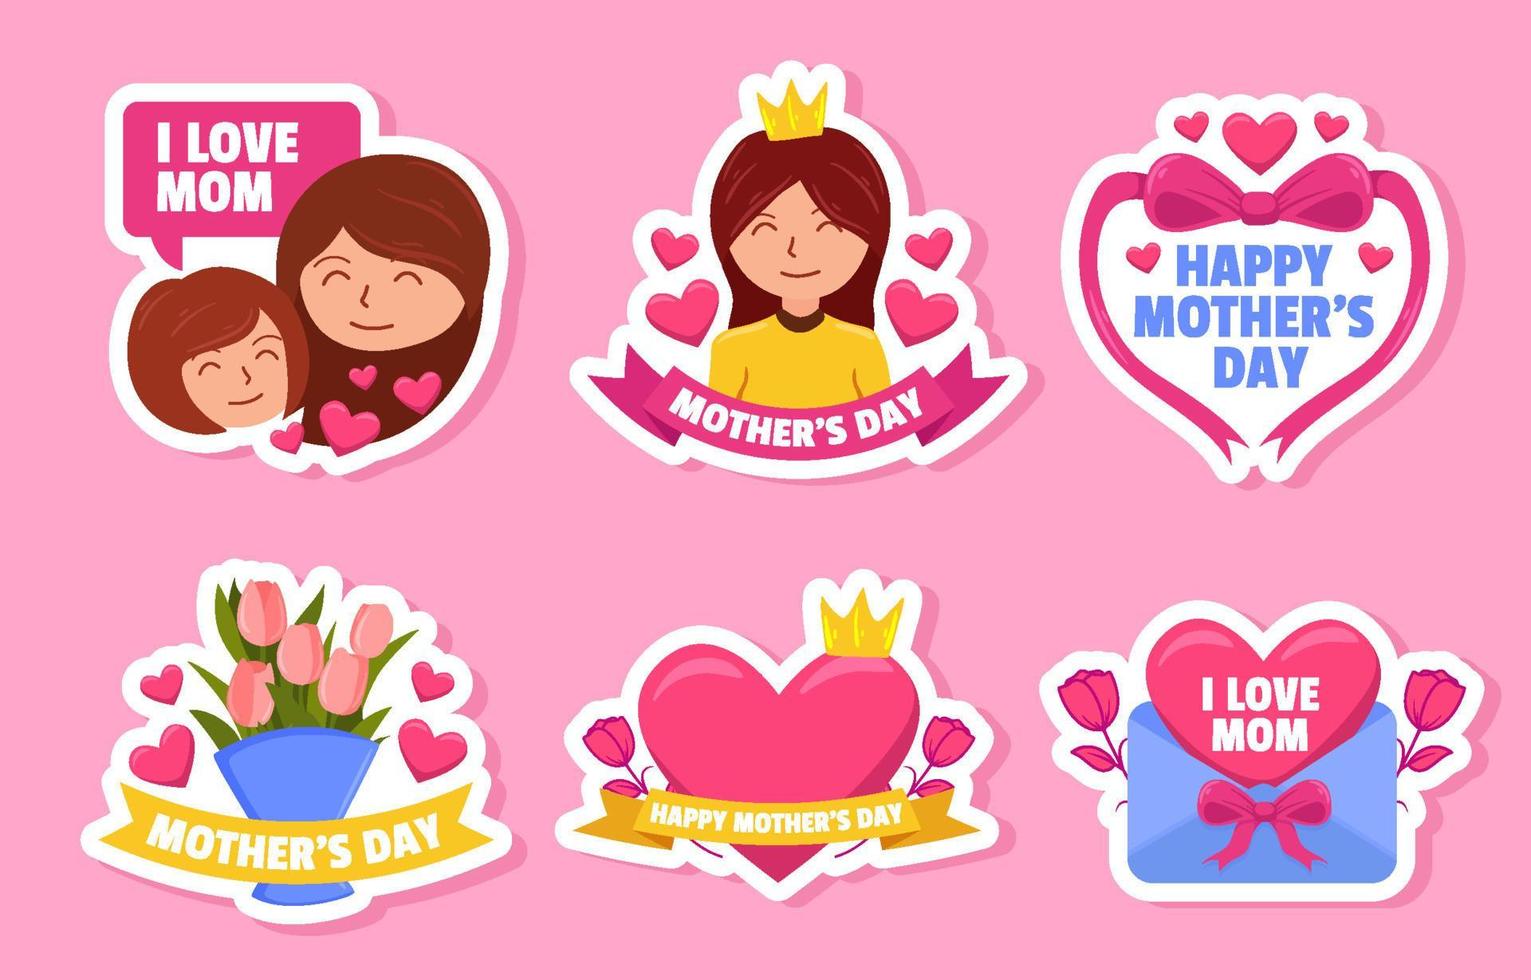 Happy Mother's Day Sticker Set vector